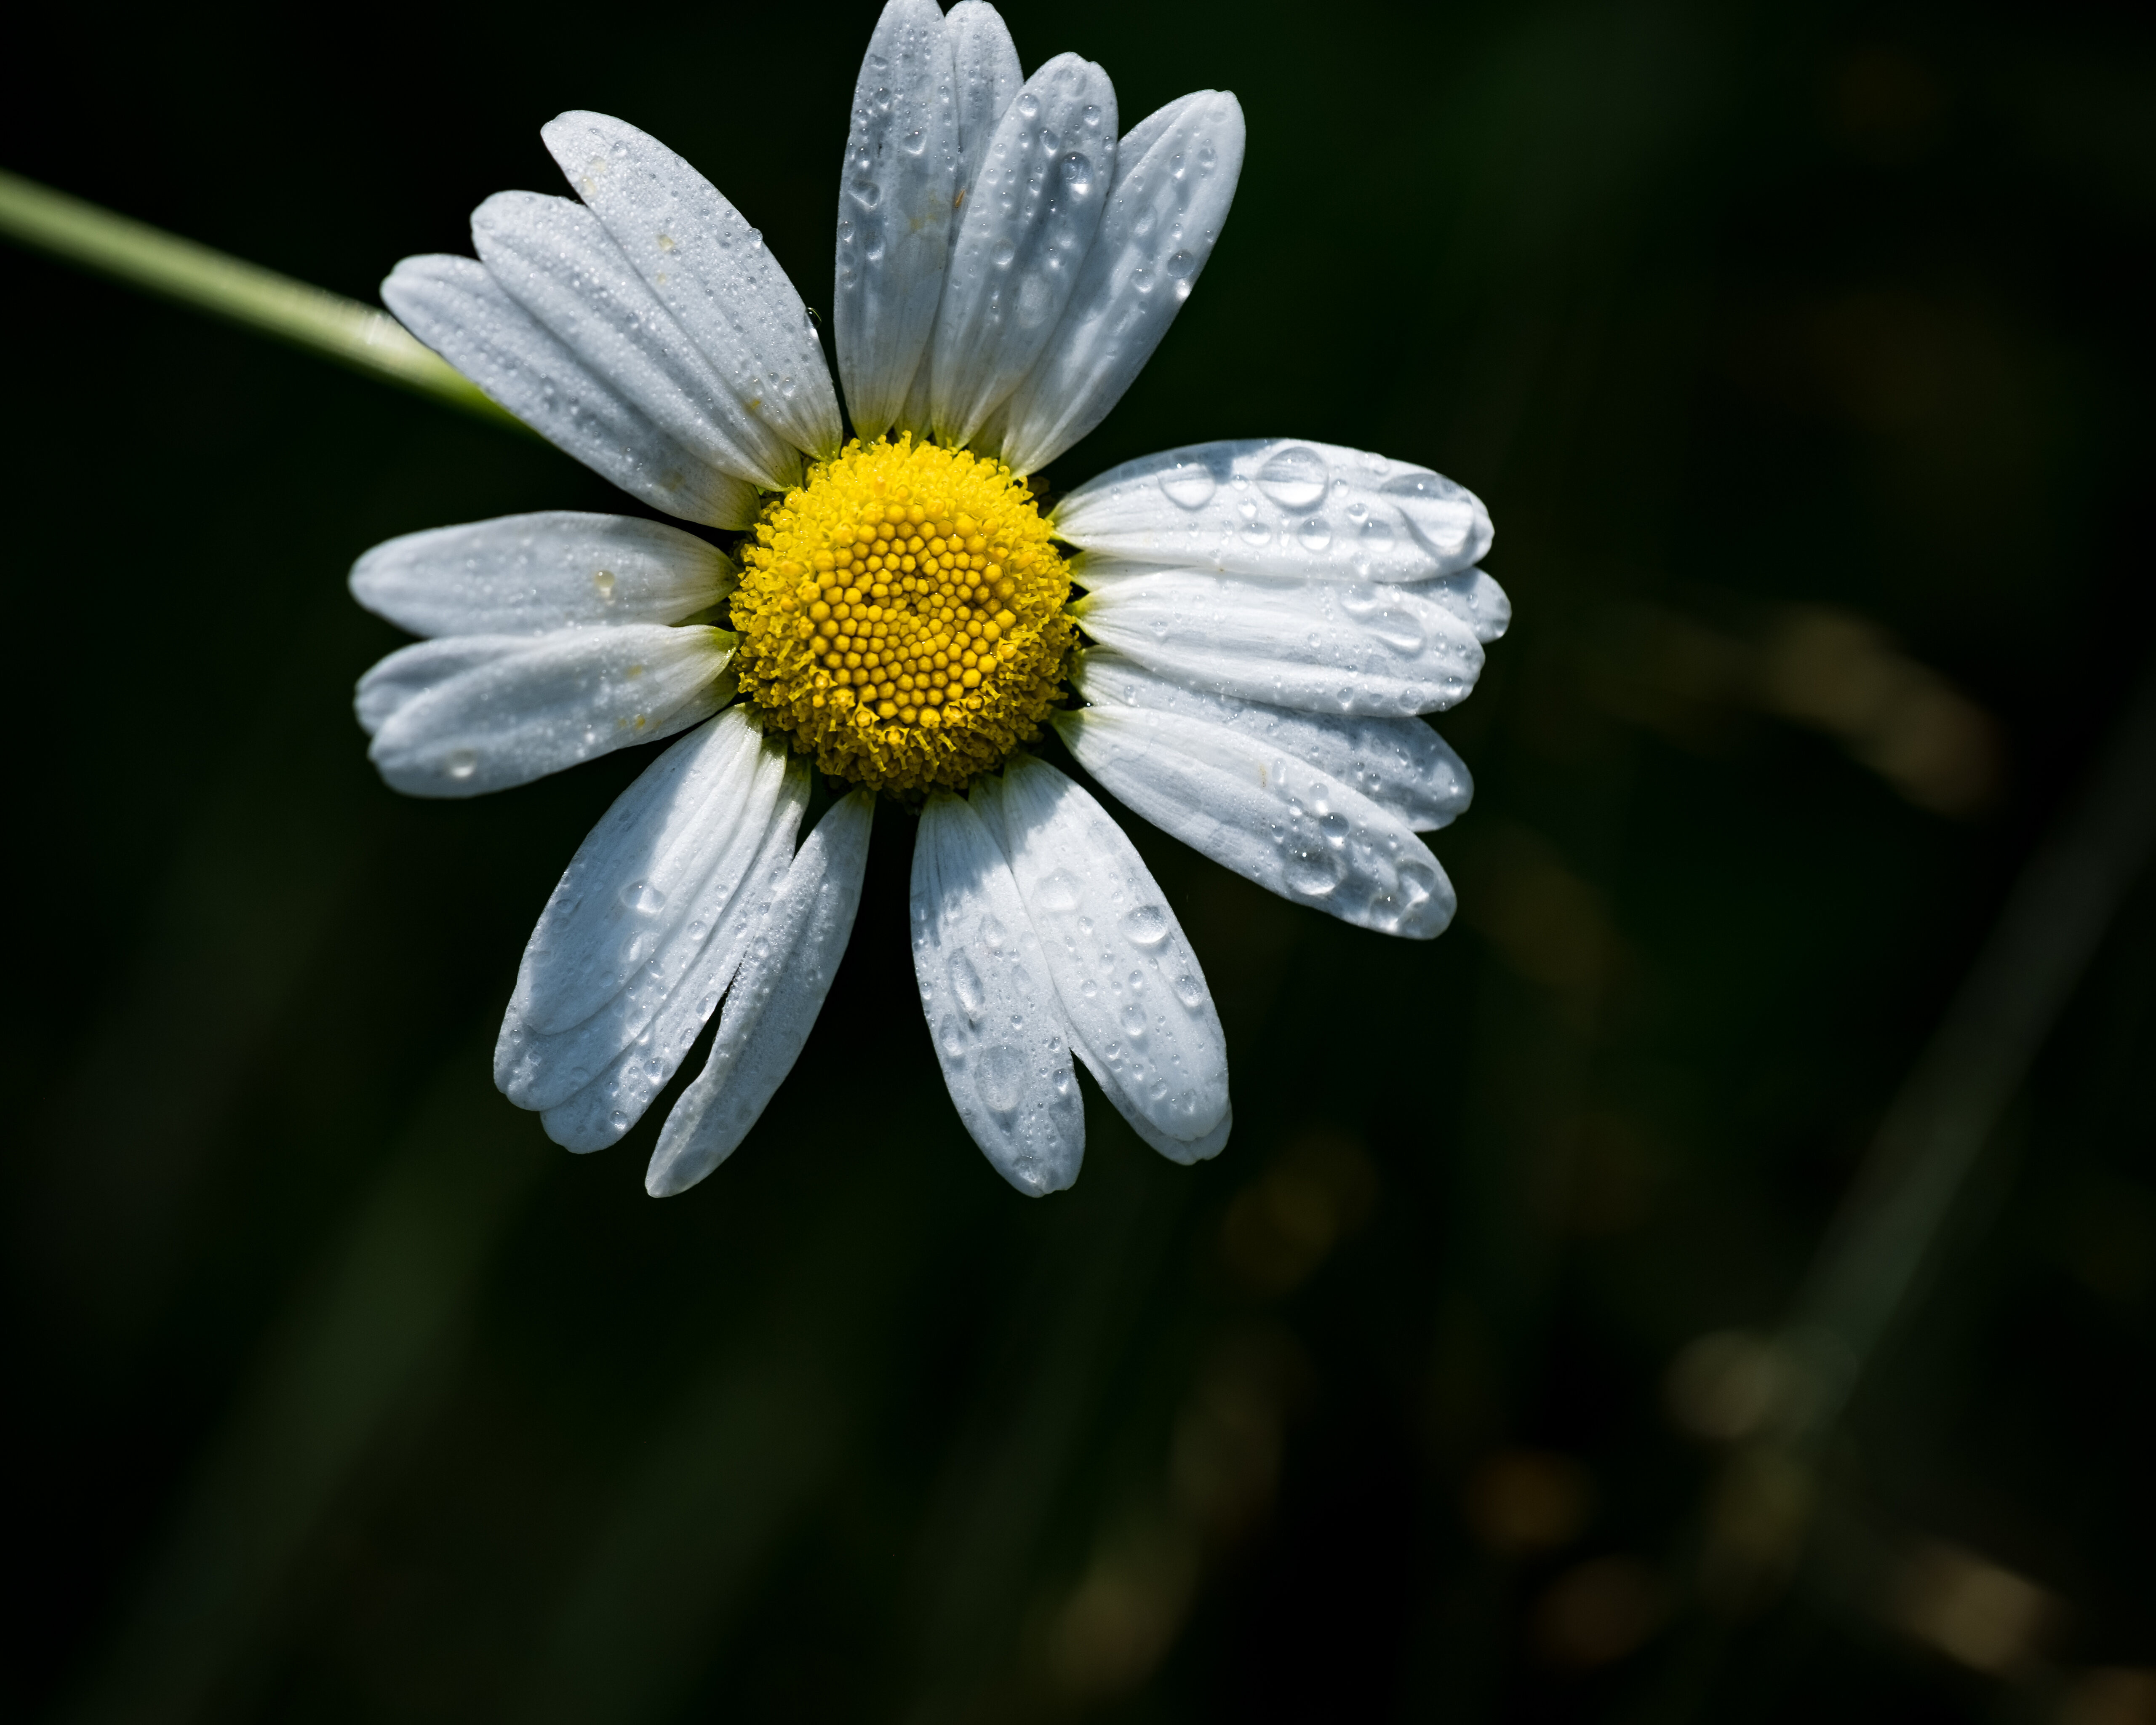 Drops of water on a lonely daisy